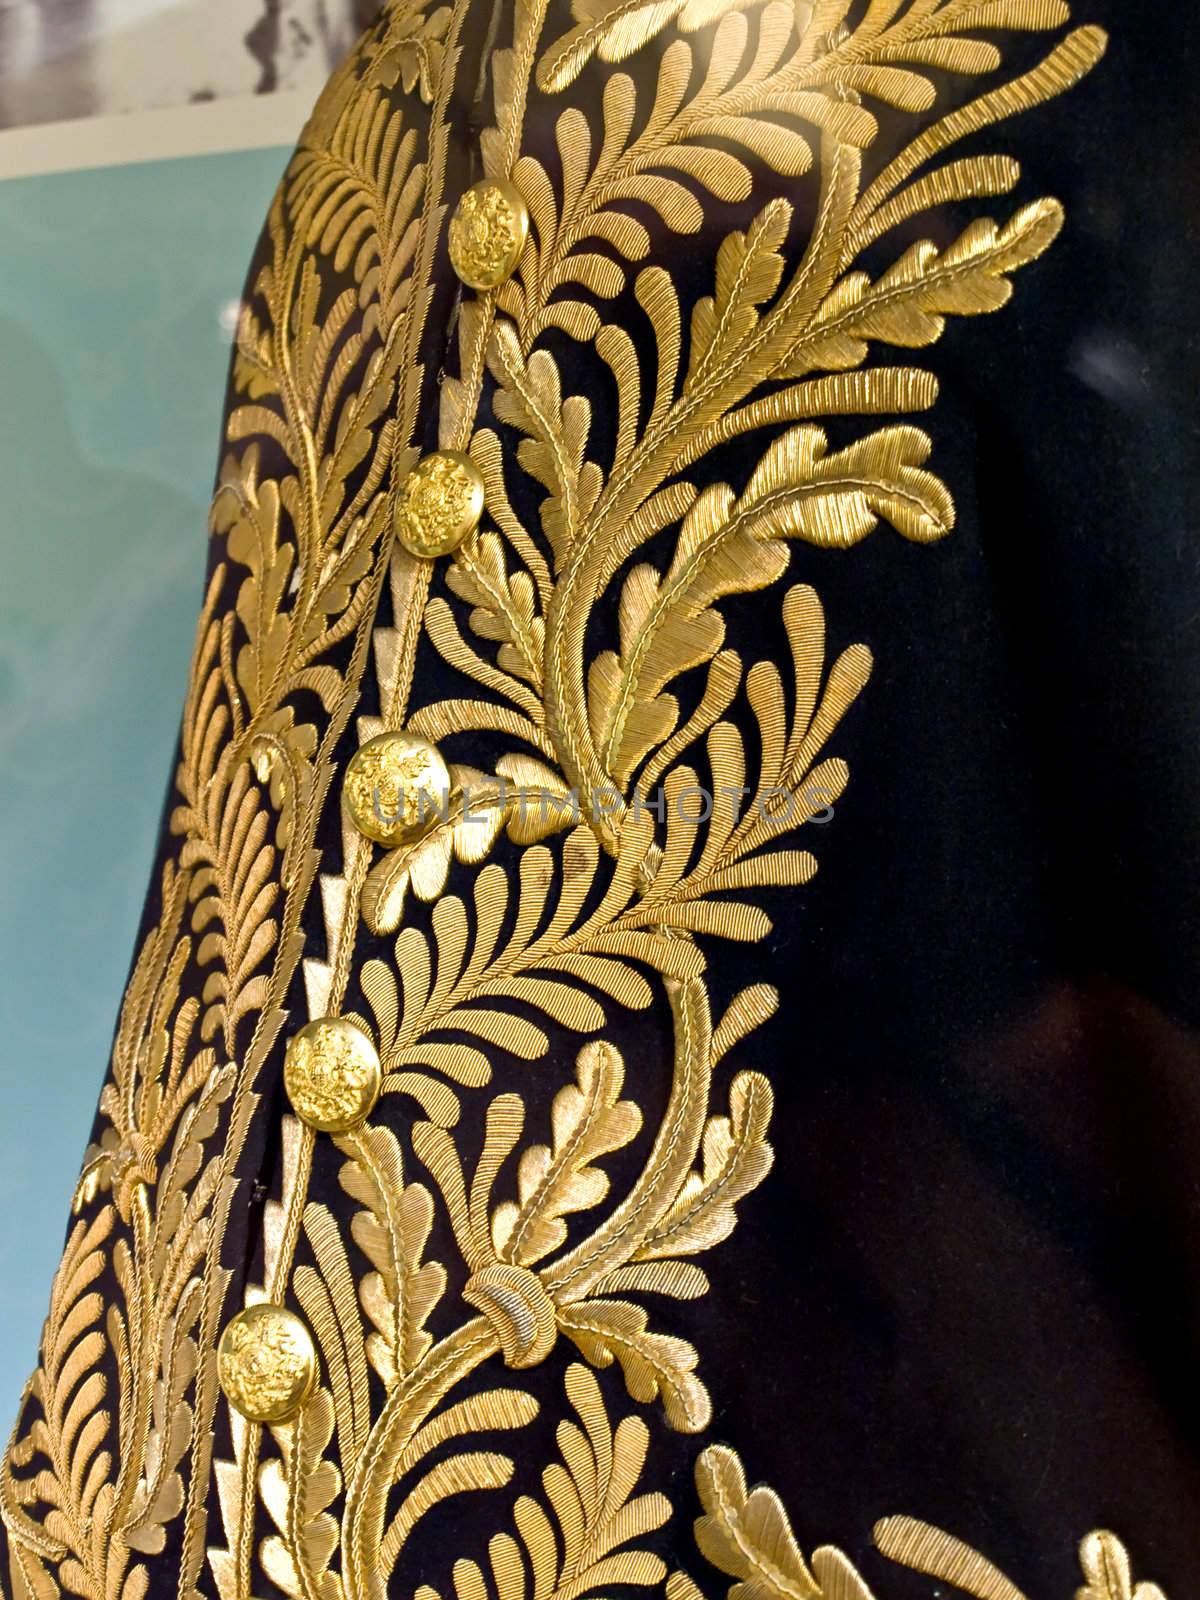 Gold Govenor Coat by watamyr